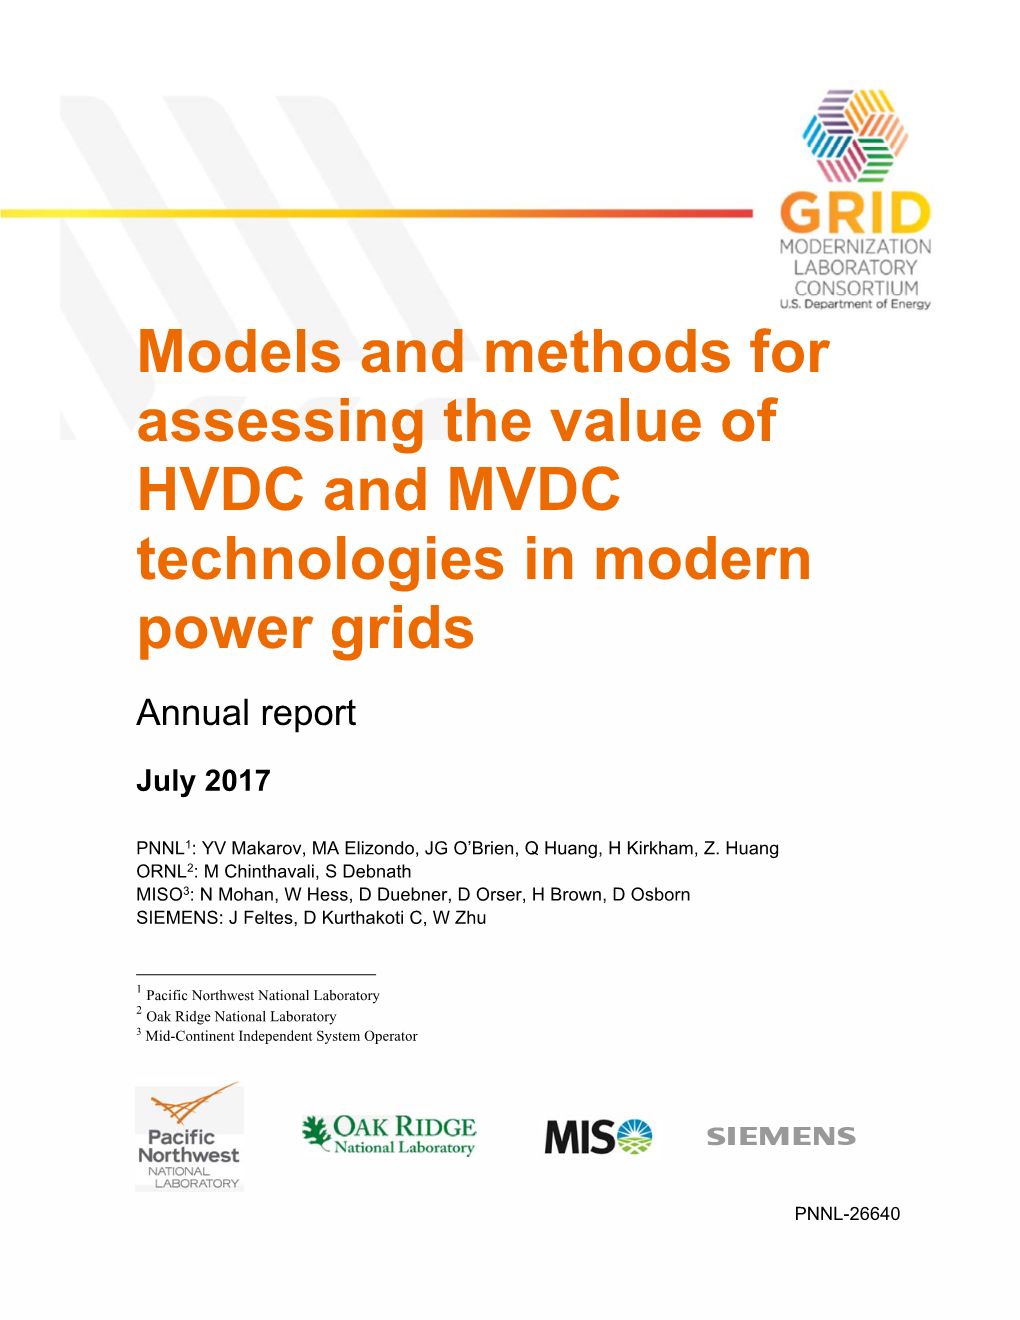 Models and Methods for Assessing the Value of HVDC and MVDC Technologies in Modern Power Grids Annual Report